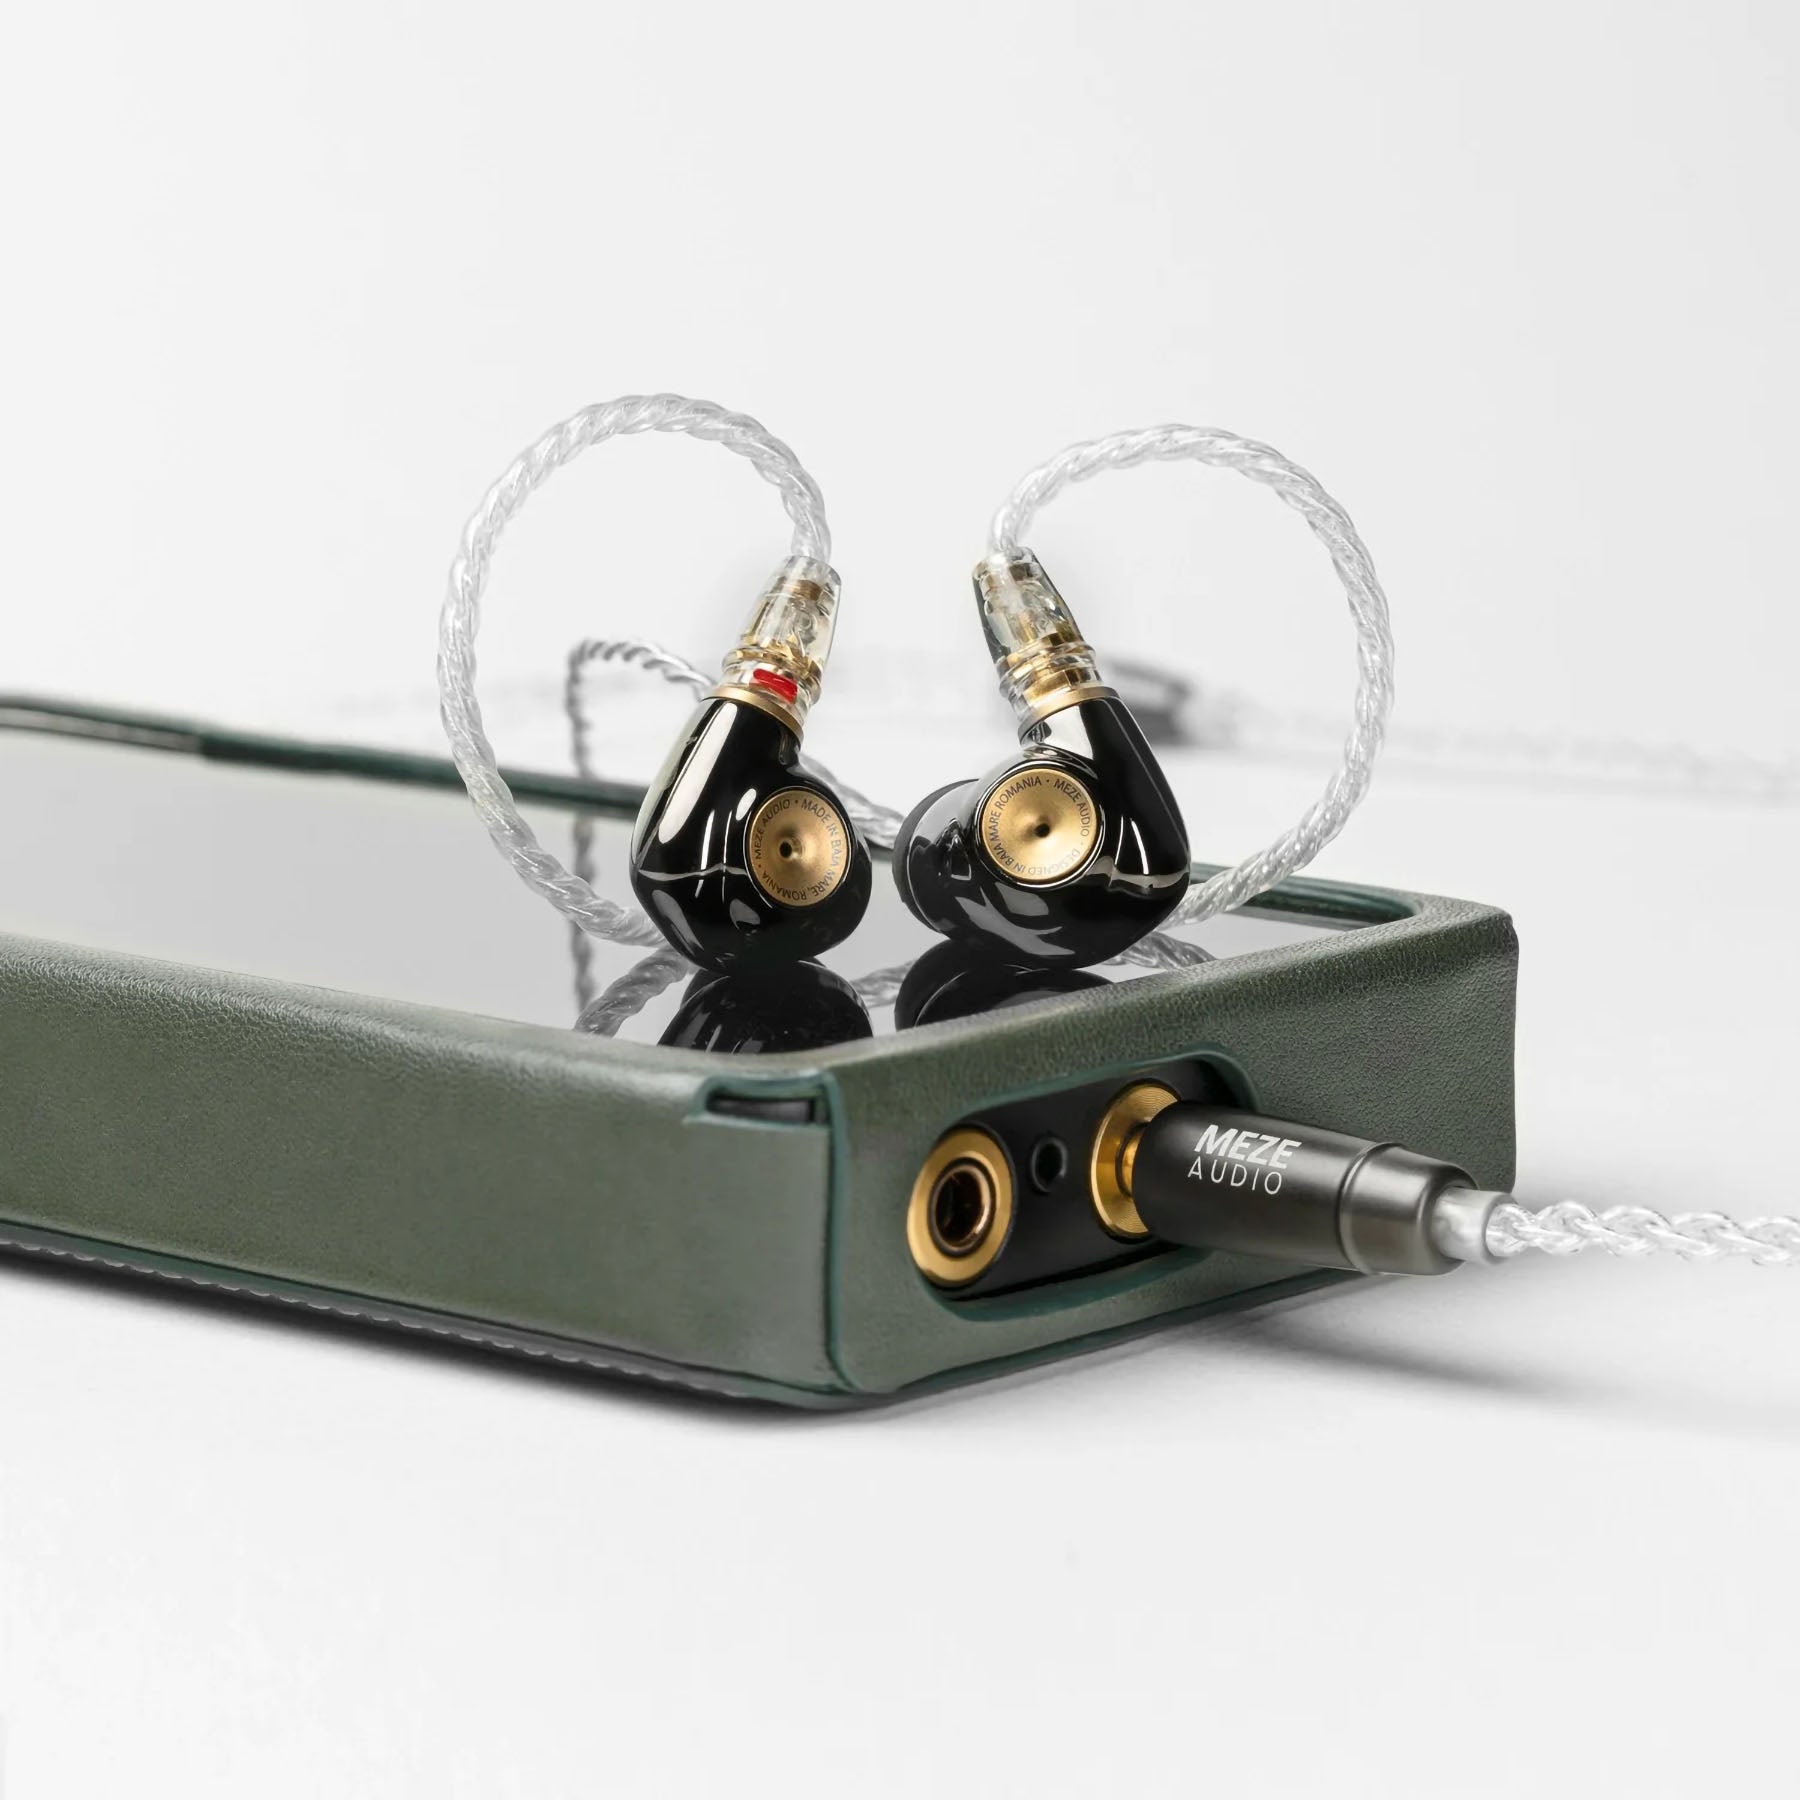 Meze Audio MMCX Silver Plated Upgrade